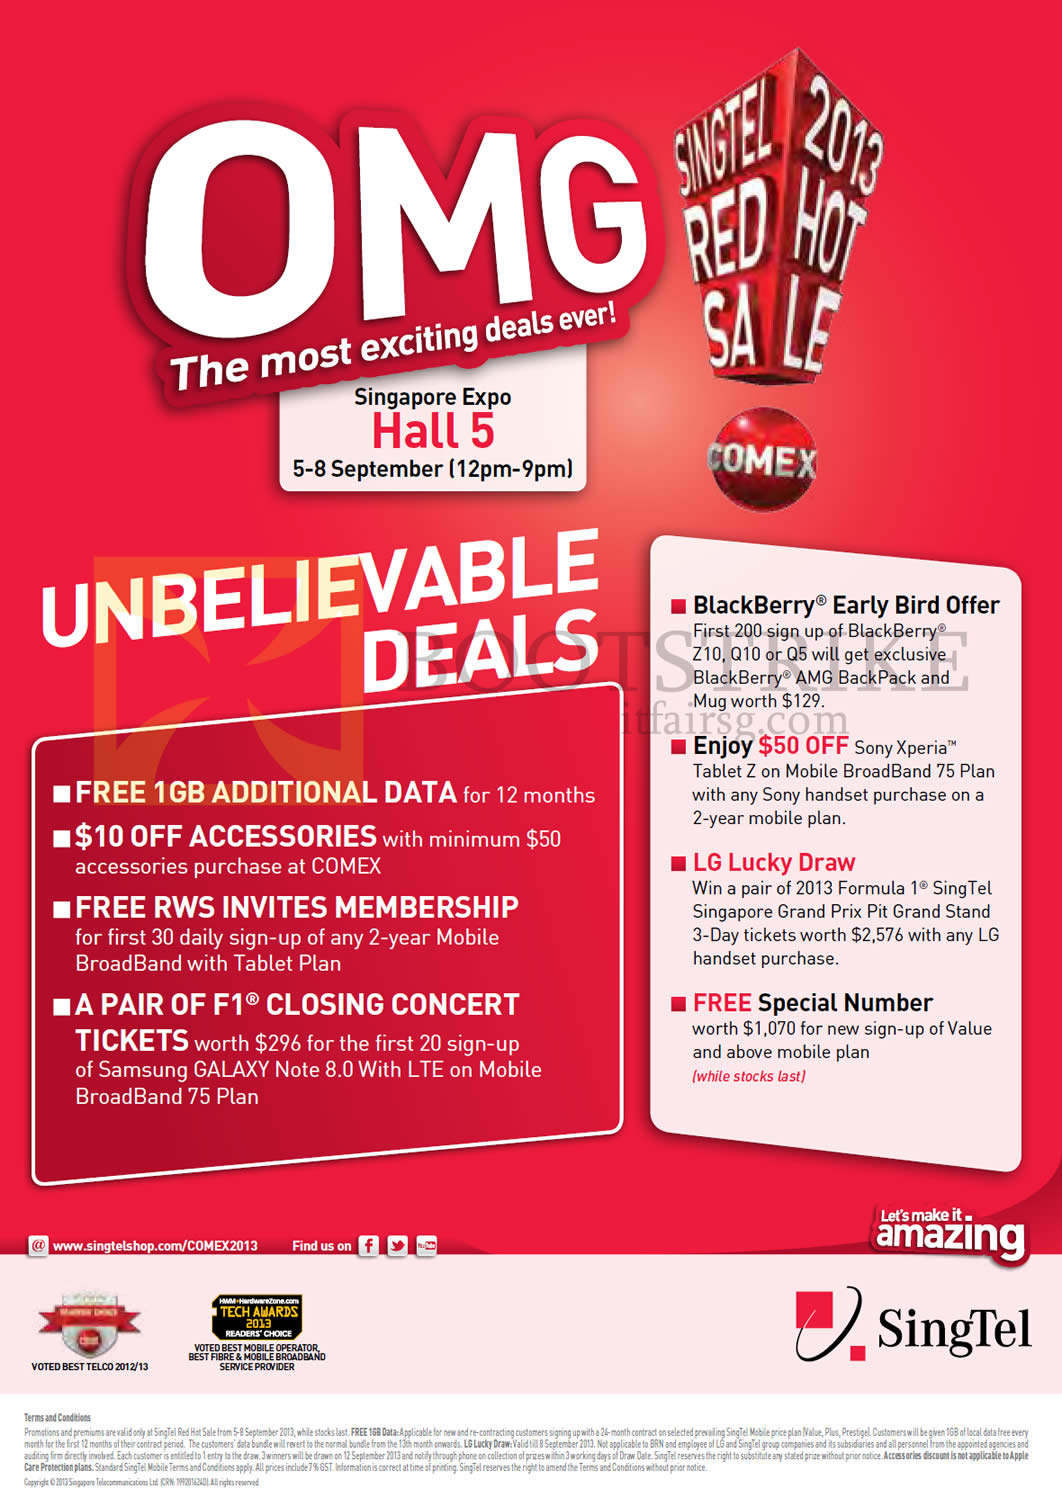 COMEX 2013 price list image brochure of Singtel Roadshow Exclusives, Free 1GB Data, RWS Invites Membership, F1 Closing Concert Tickets, Blackberry, Sony Xperia Z, Special Number